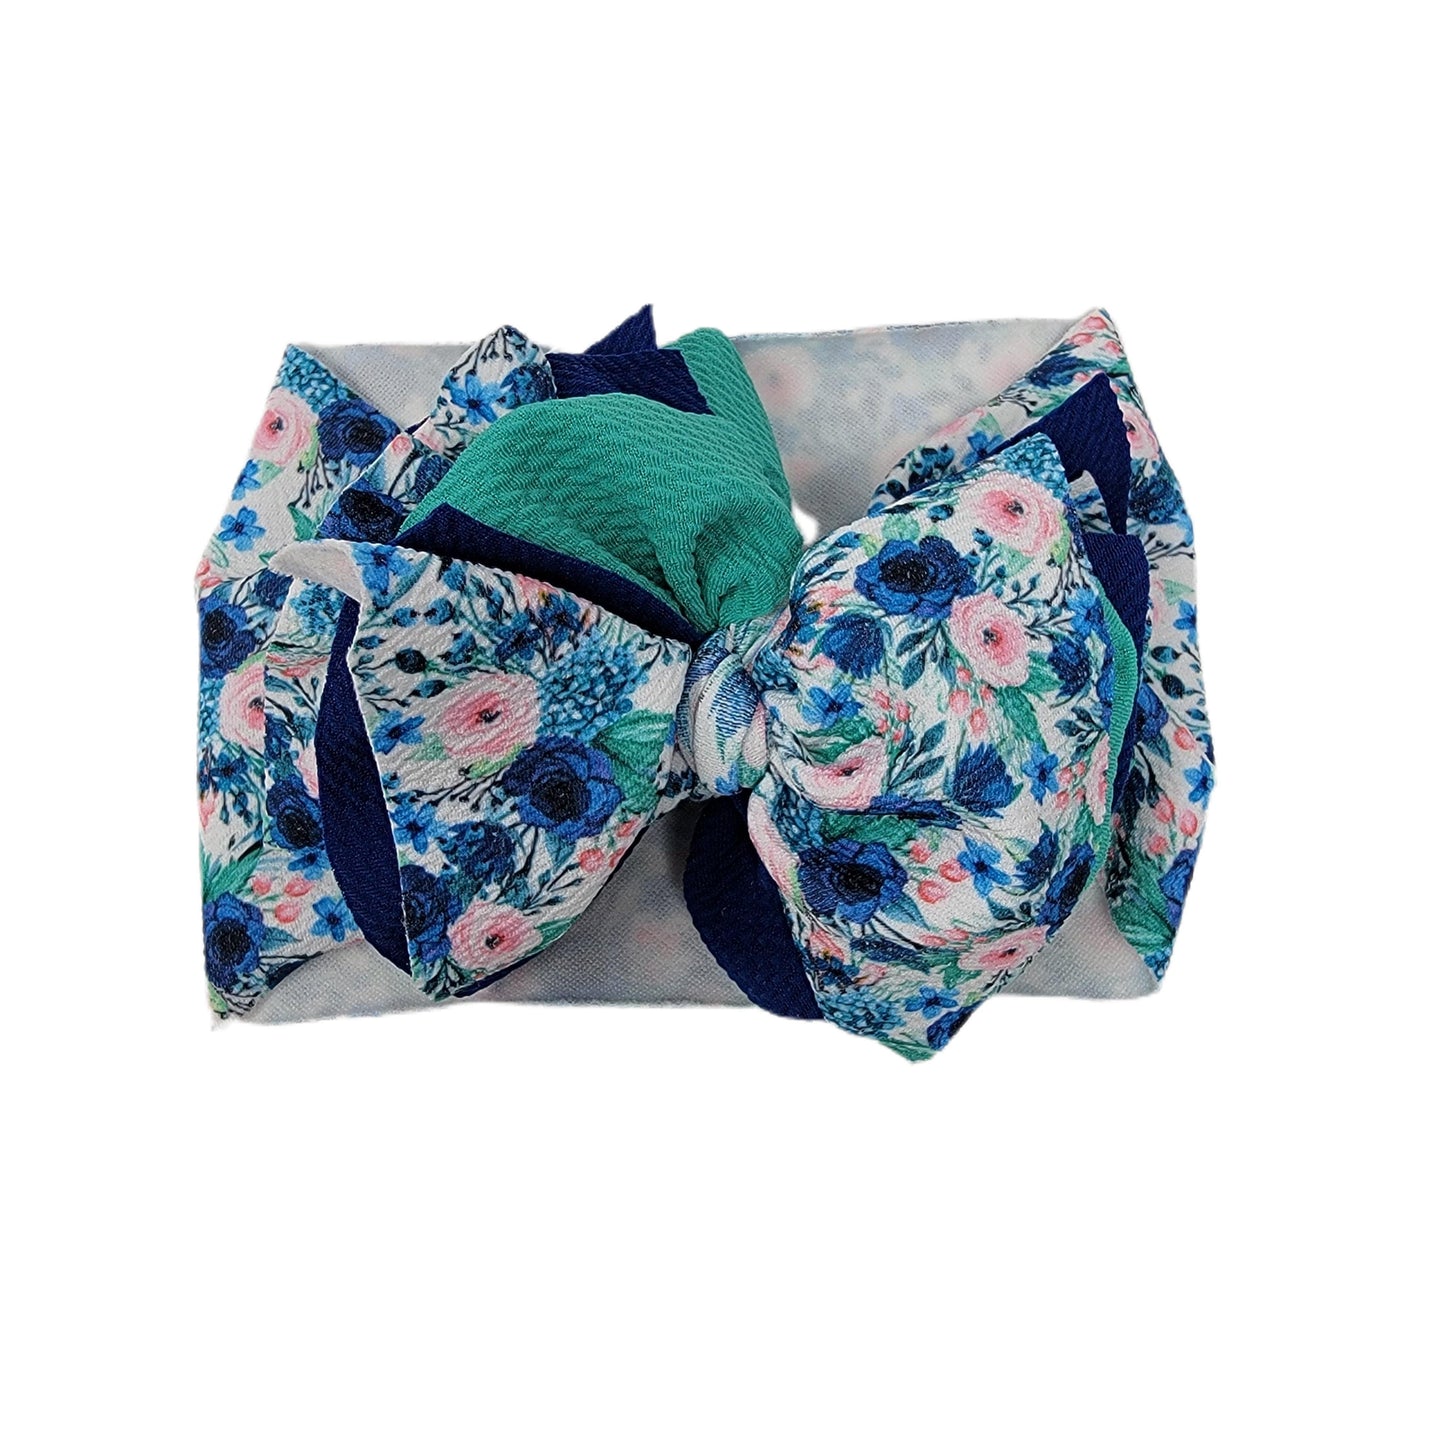 Southern Belle Sassy Fabric Bow Headwrap 5"